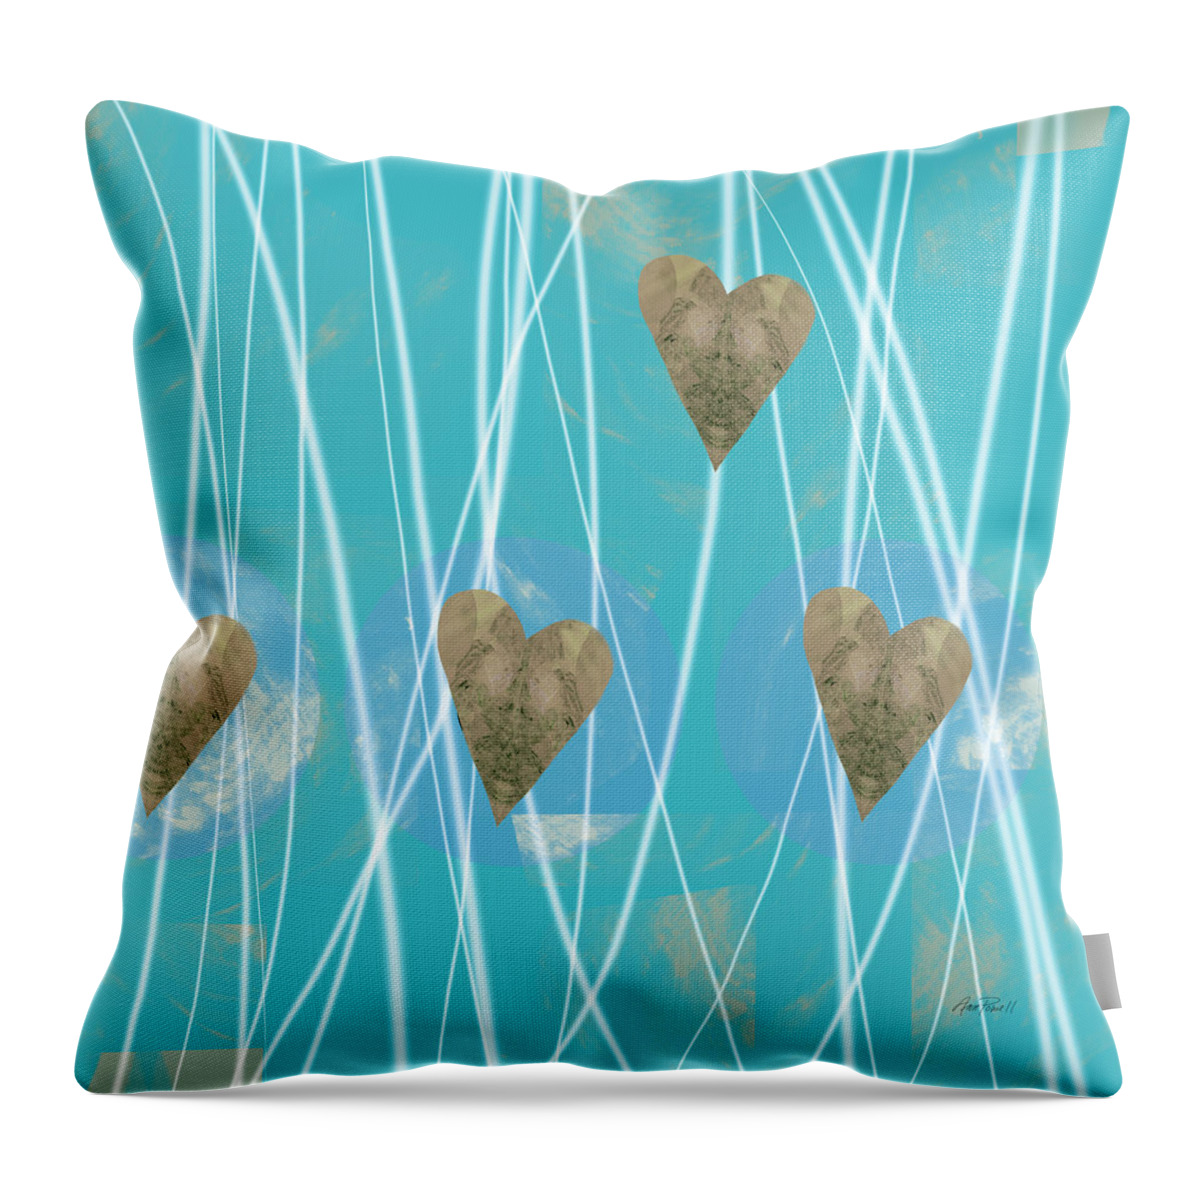 Heart Throw Pillow featuring the painting Heart Strings abstract art by Ann Powell